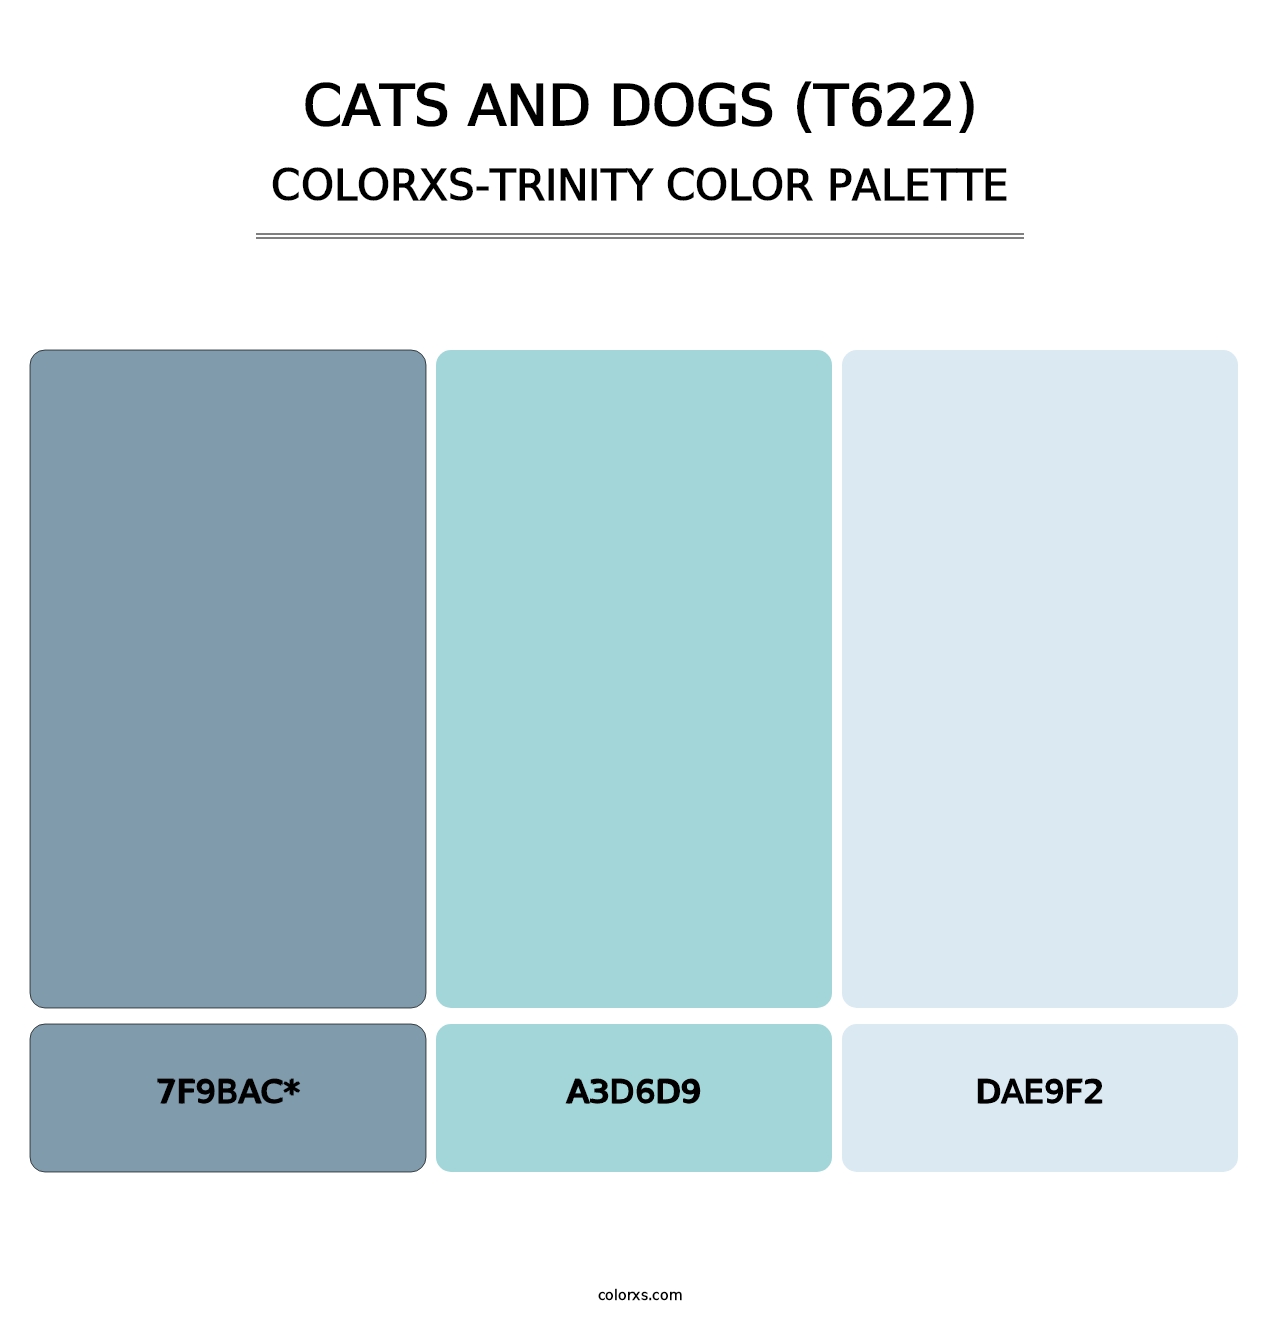 Cats and Dogs (T622) - Colorxs Trinity Palette